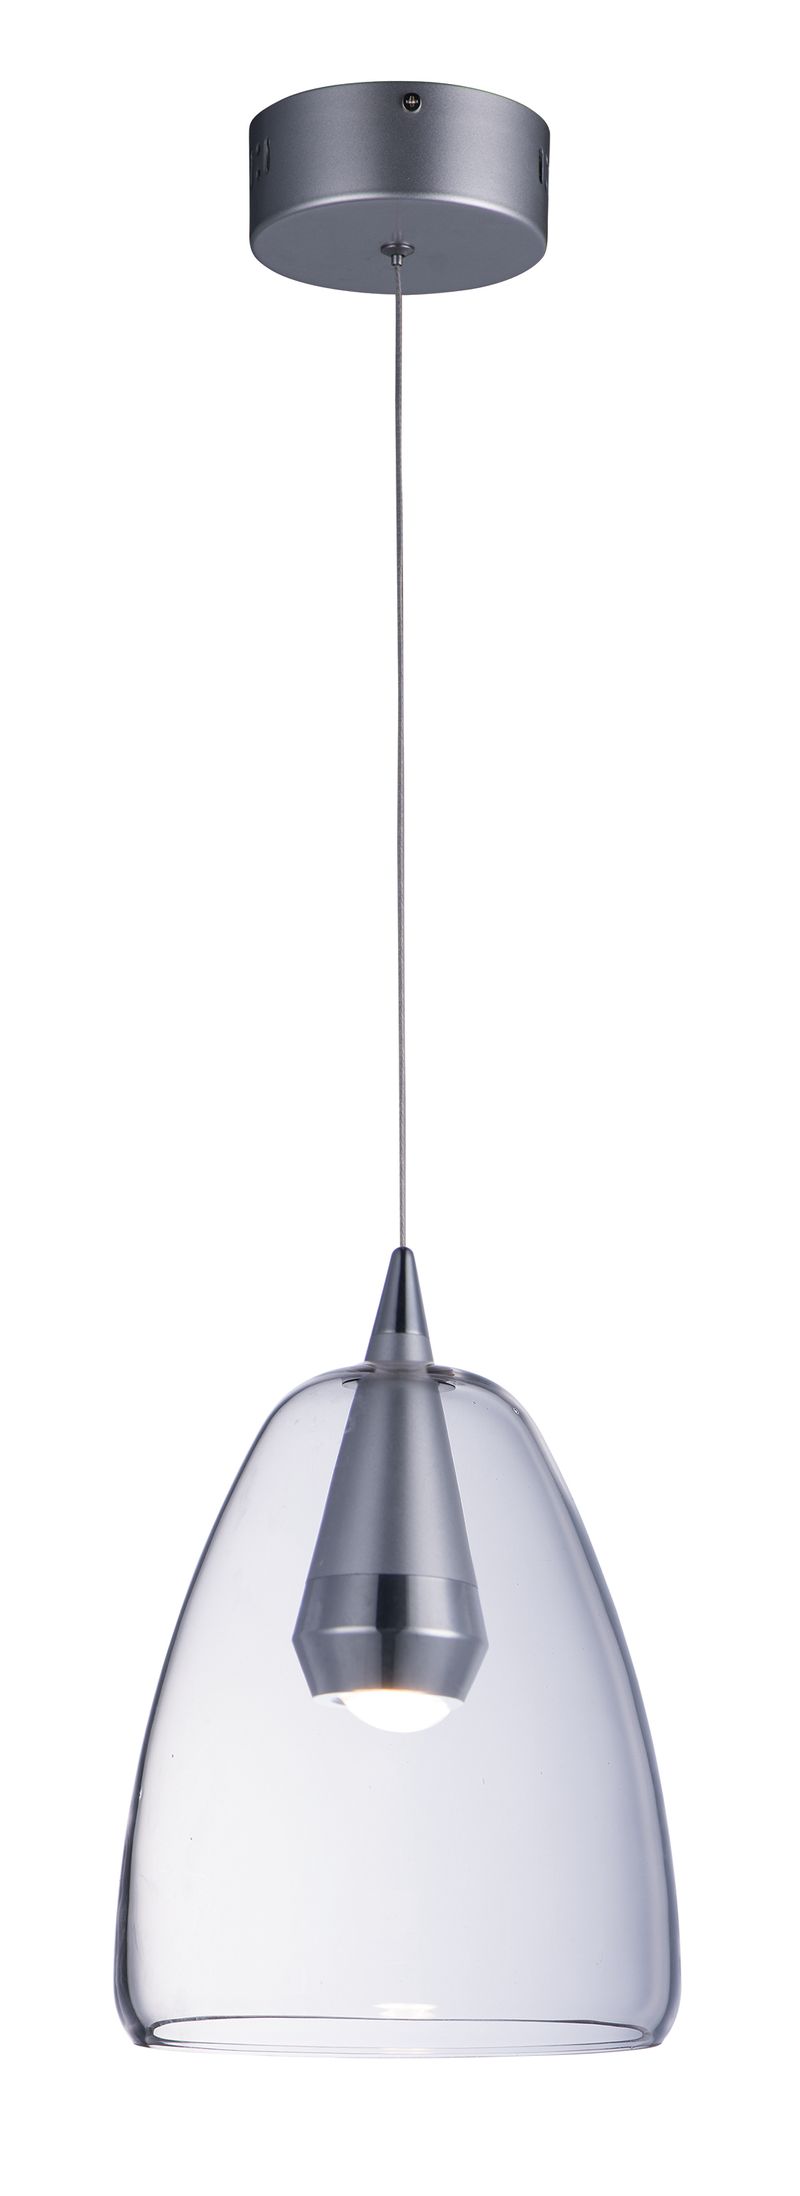 Sven 8' Single Light Pendant in Polished Chrome and Silver